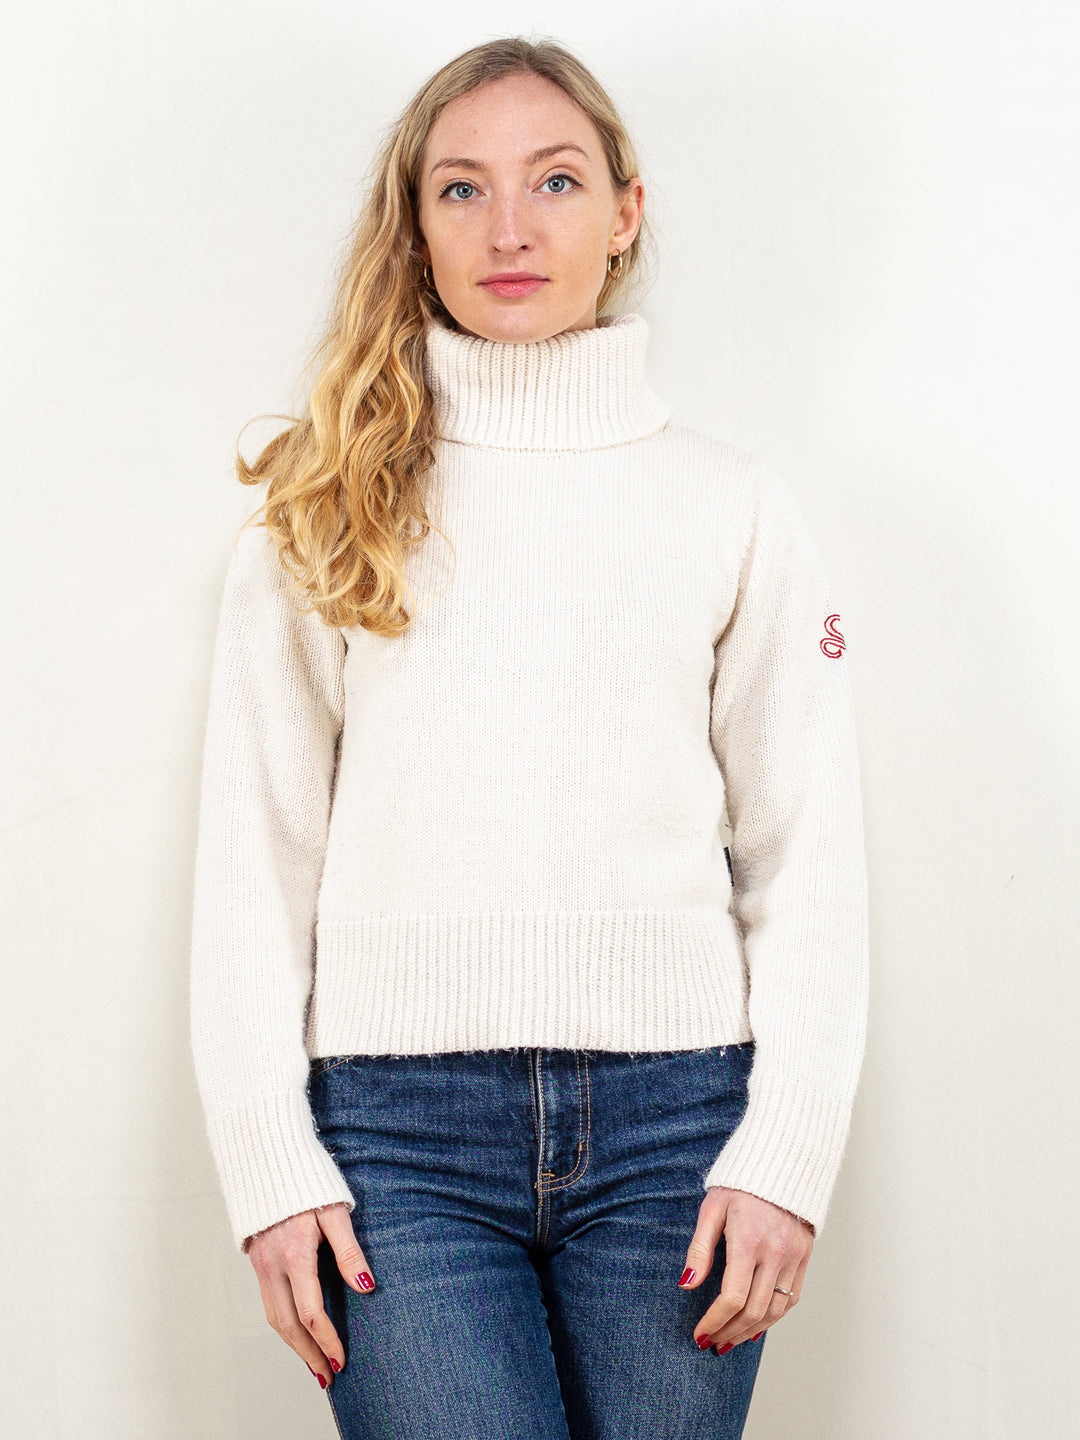 Dickies Knit Sweater vintage 90's apres ski synthetics blend white turtleneck pullover sweater women jumper sustainable size extra small XS